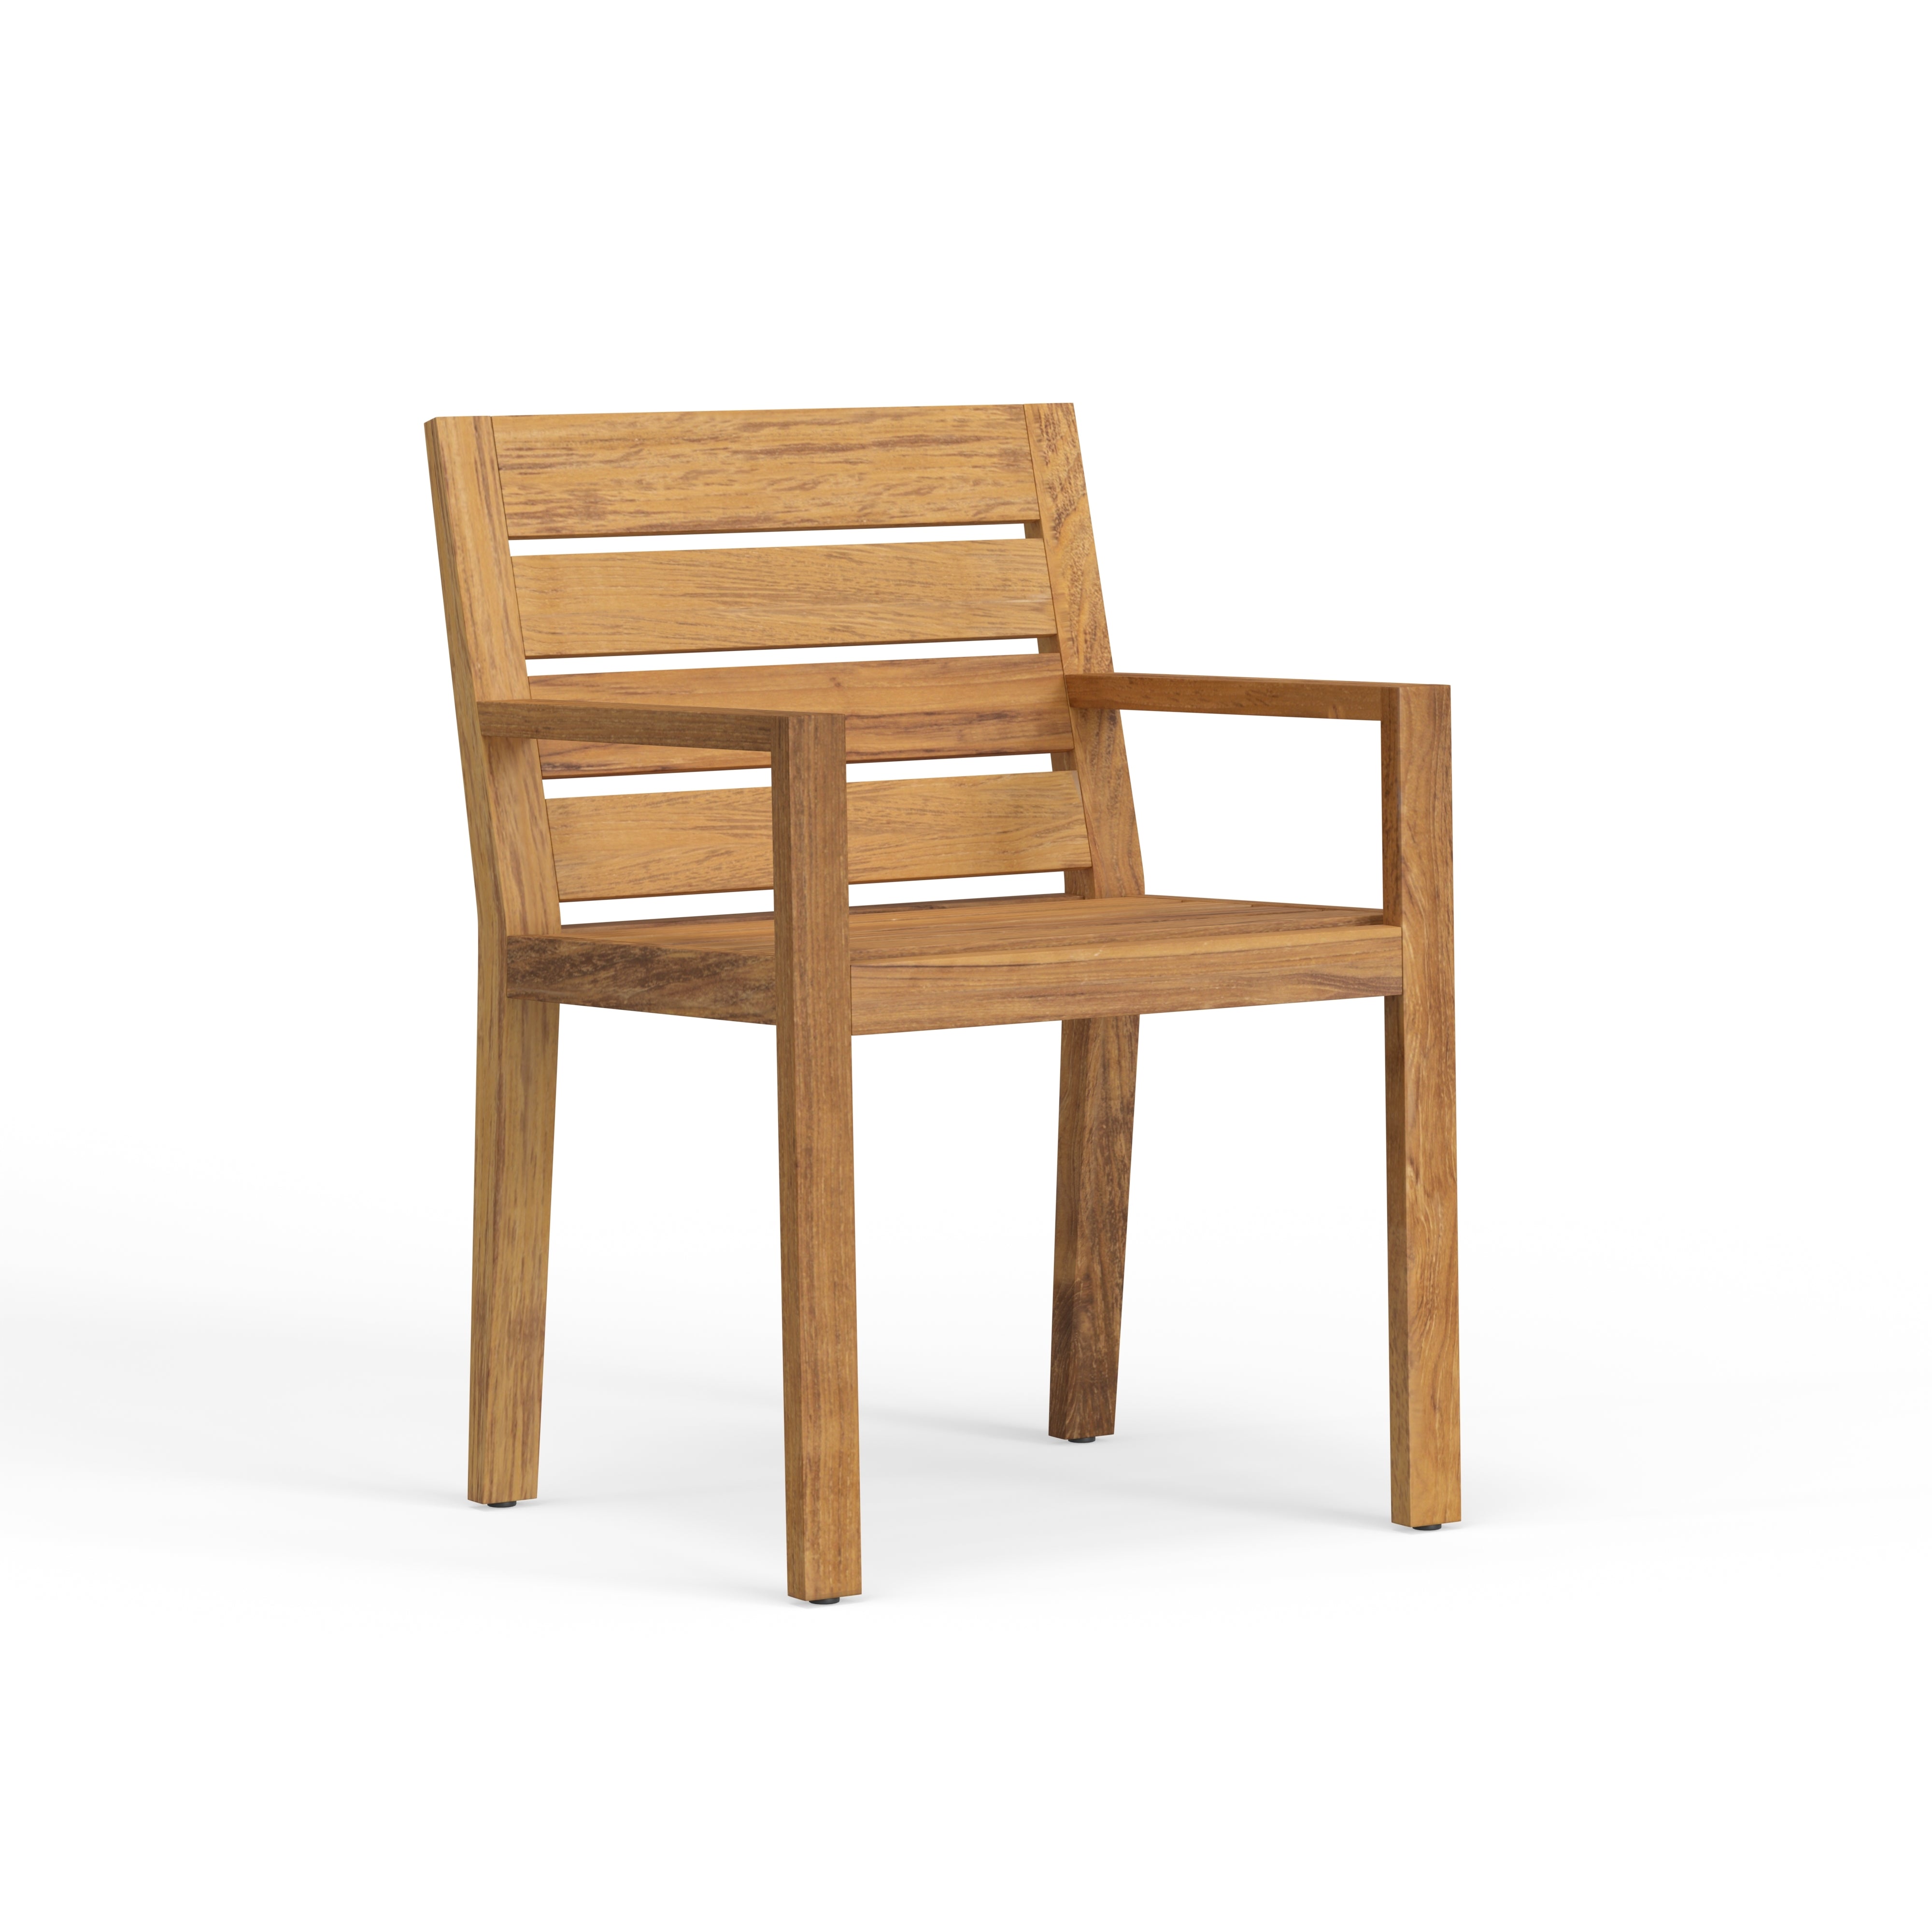 Most Comfortable Quality Outdoor Teak Dining Chair